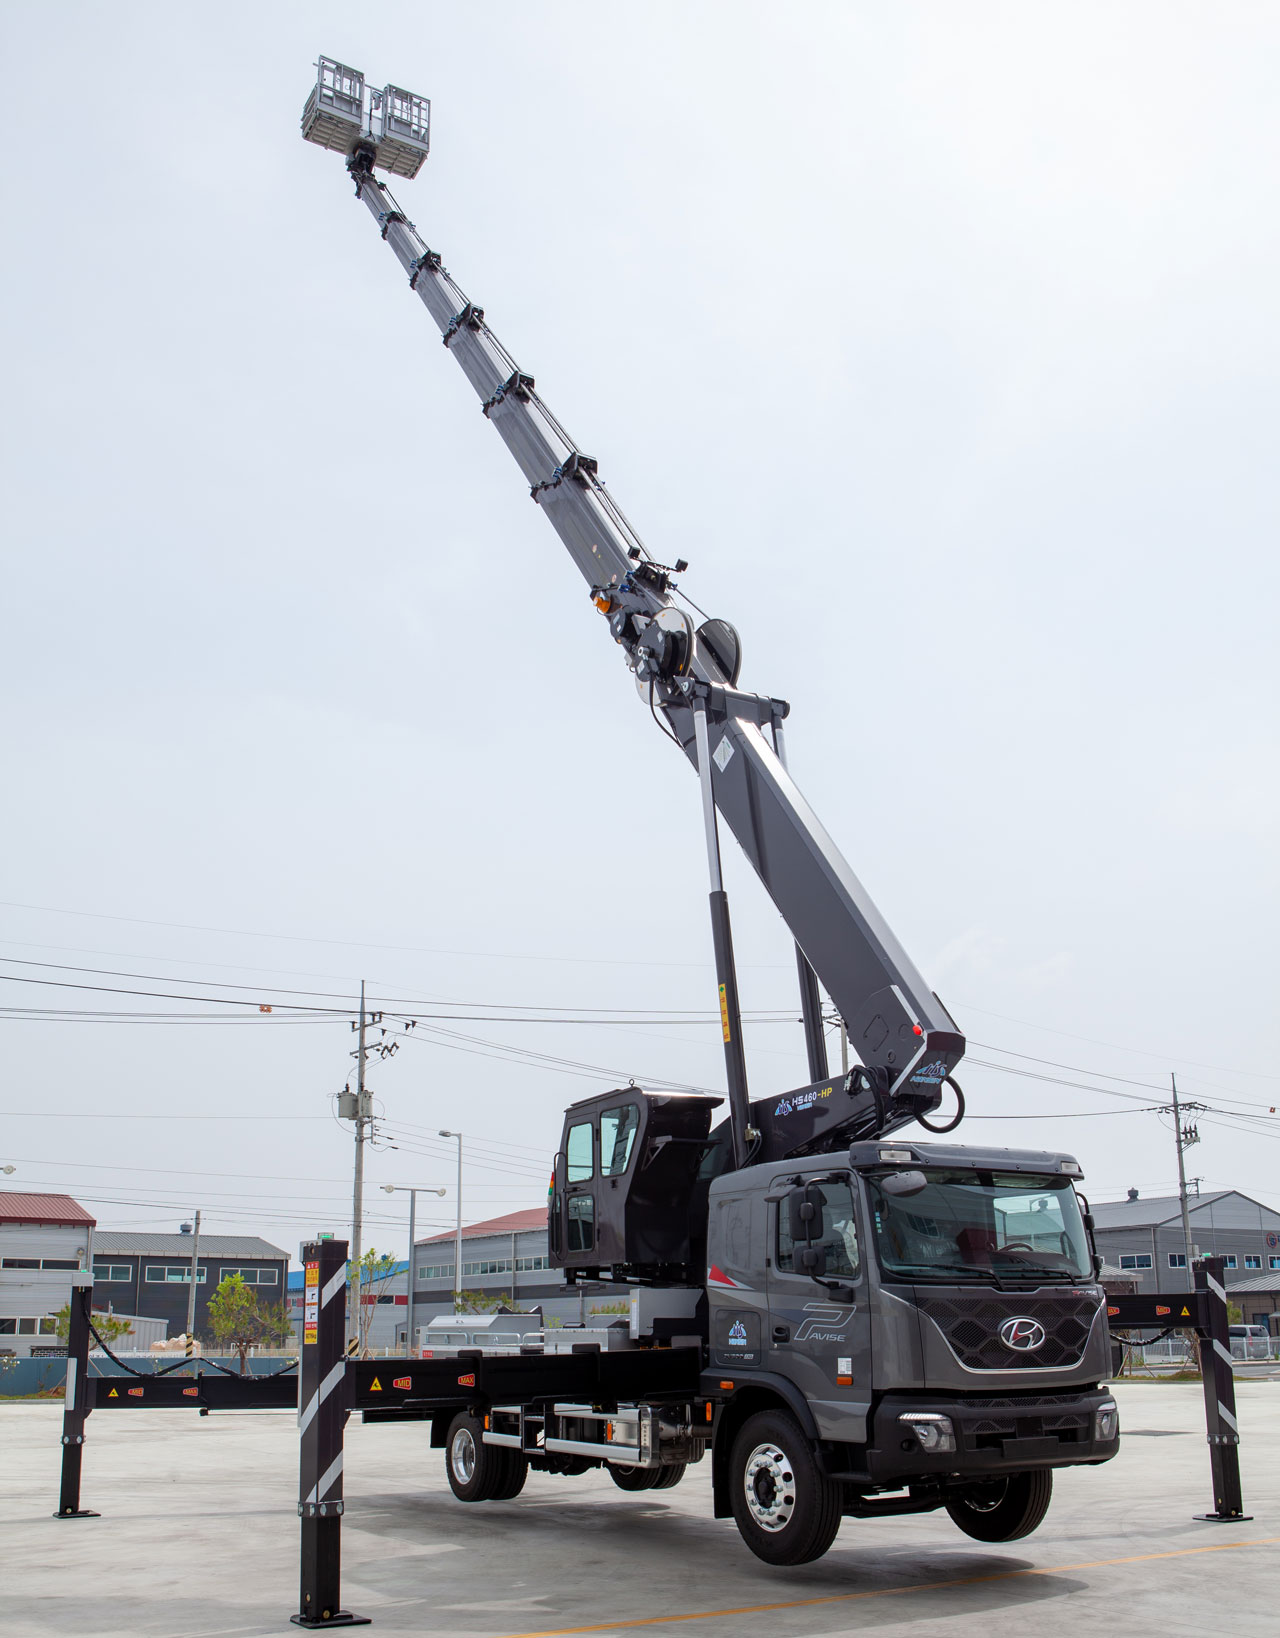 The very long boom on an aerial lift truck, made in Strenx® structural steel, reaching up to the sky.